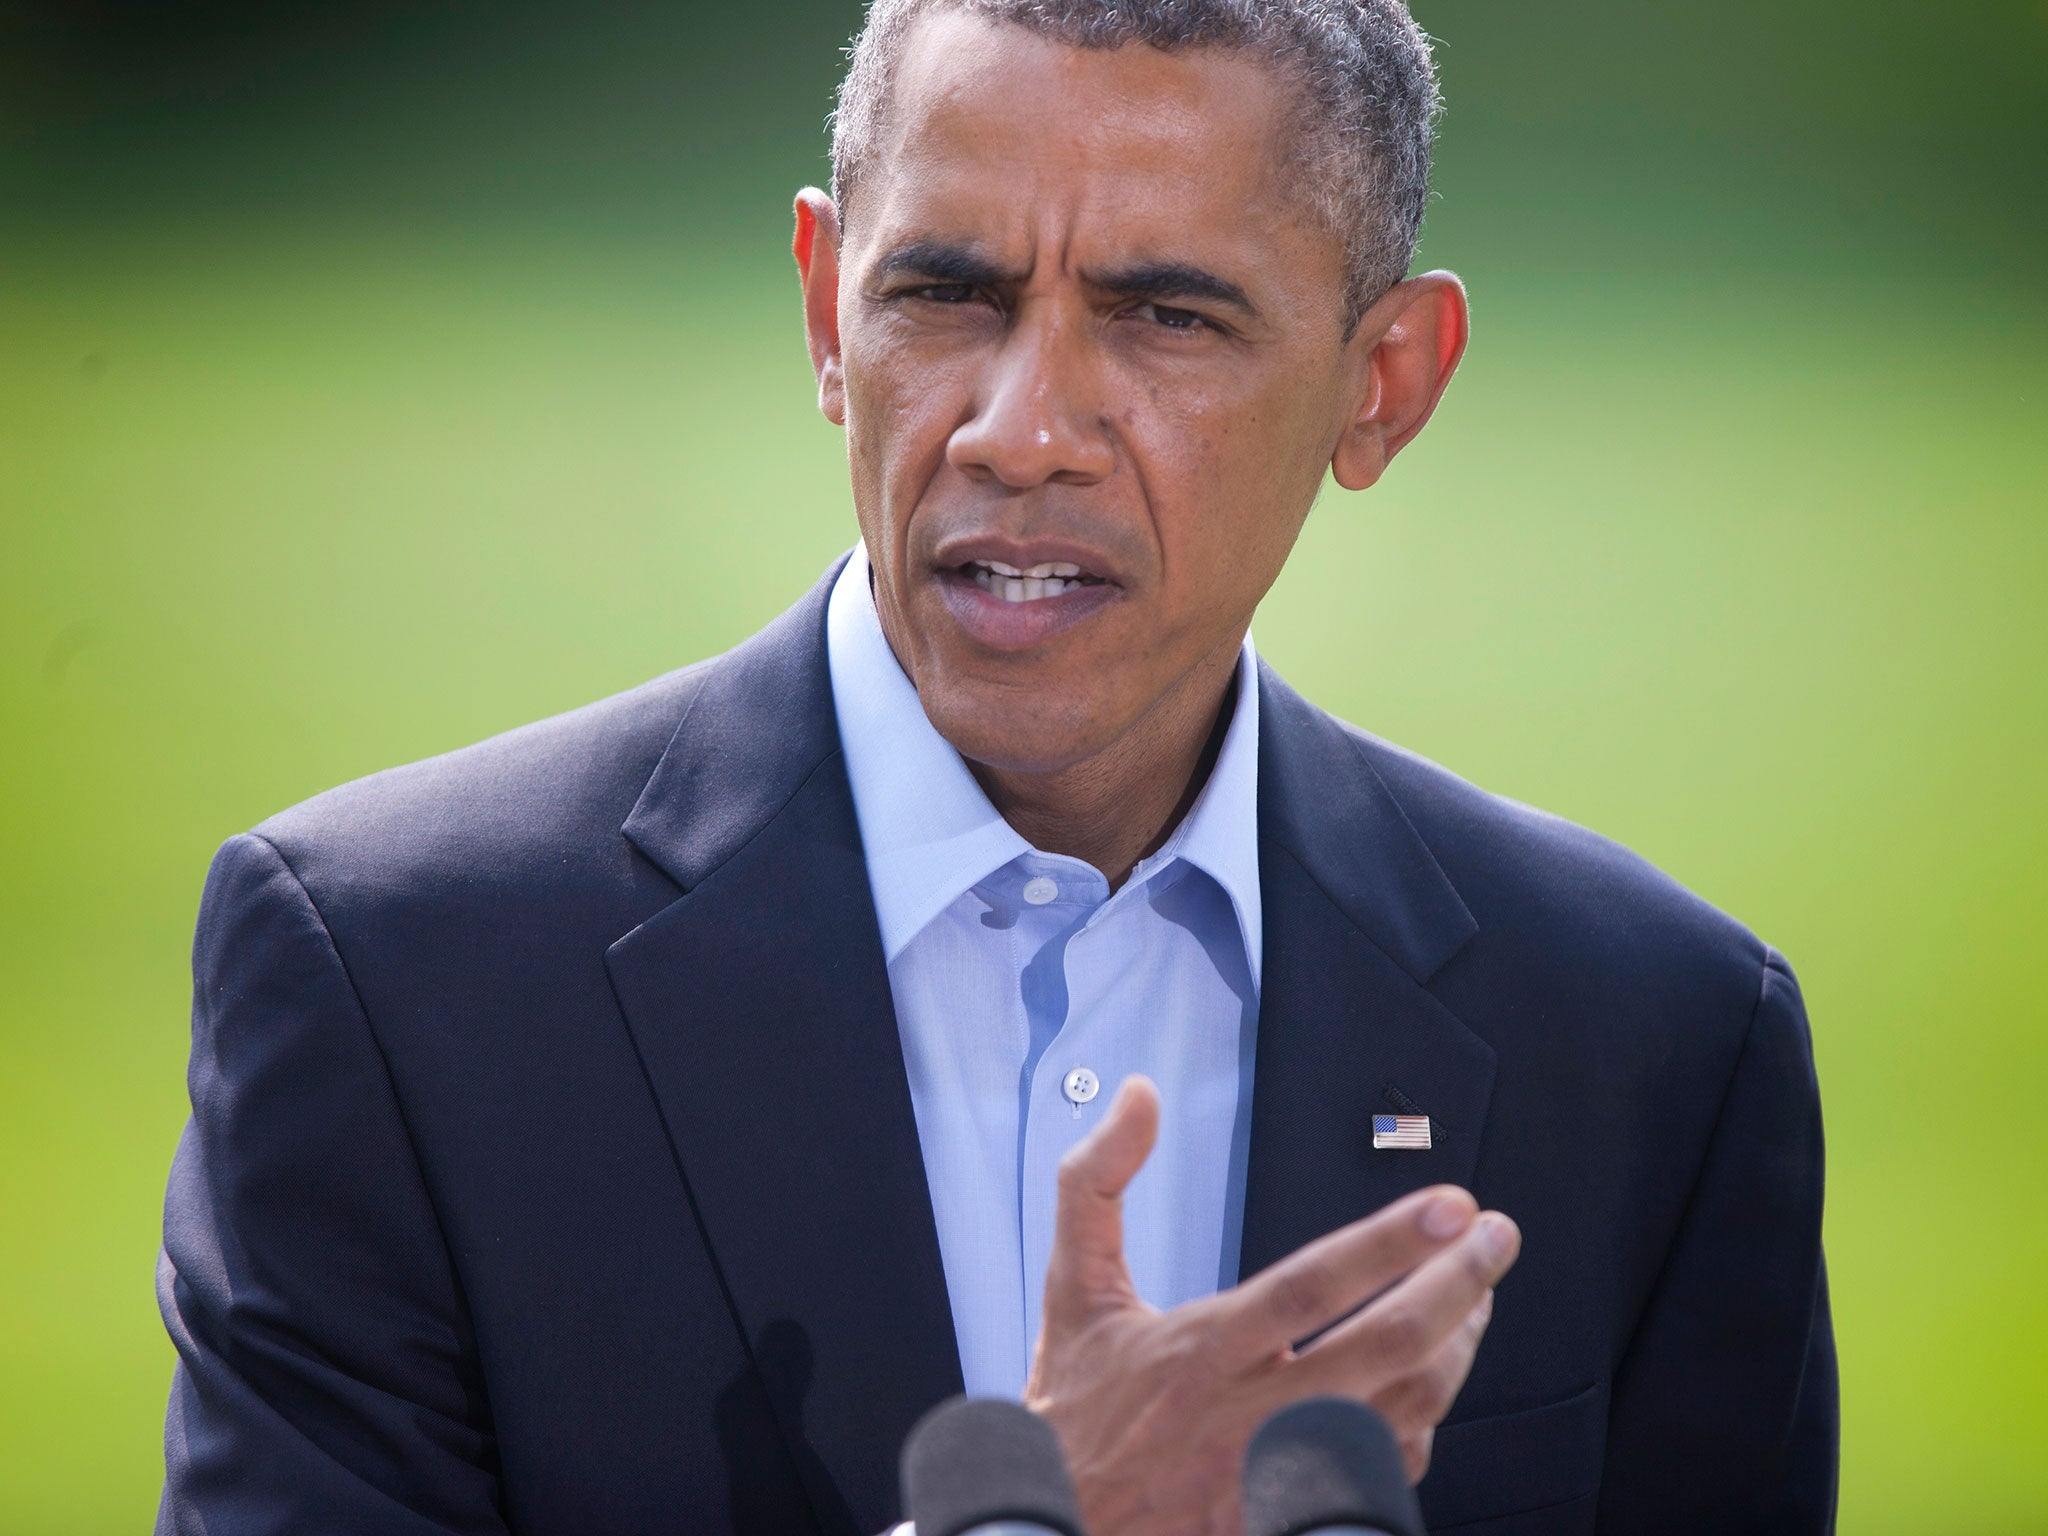 President Barack Obama speaking on the South Lawn of the White House in Washington, about the ongoing situation in Iraq